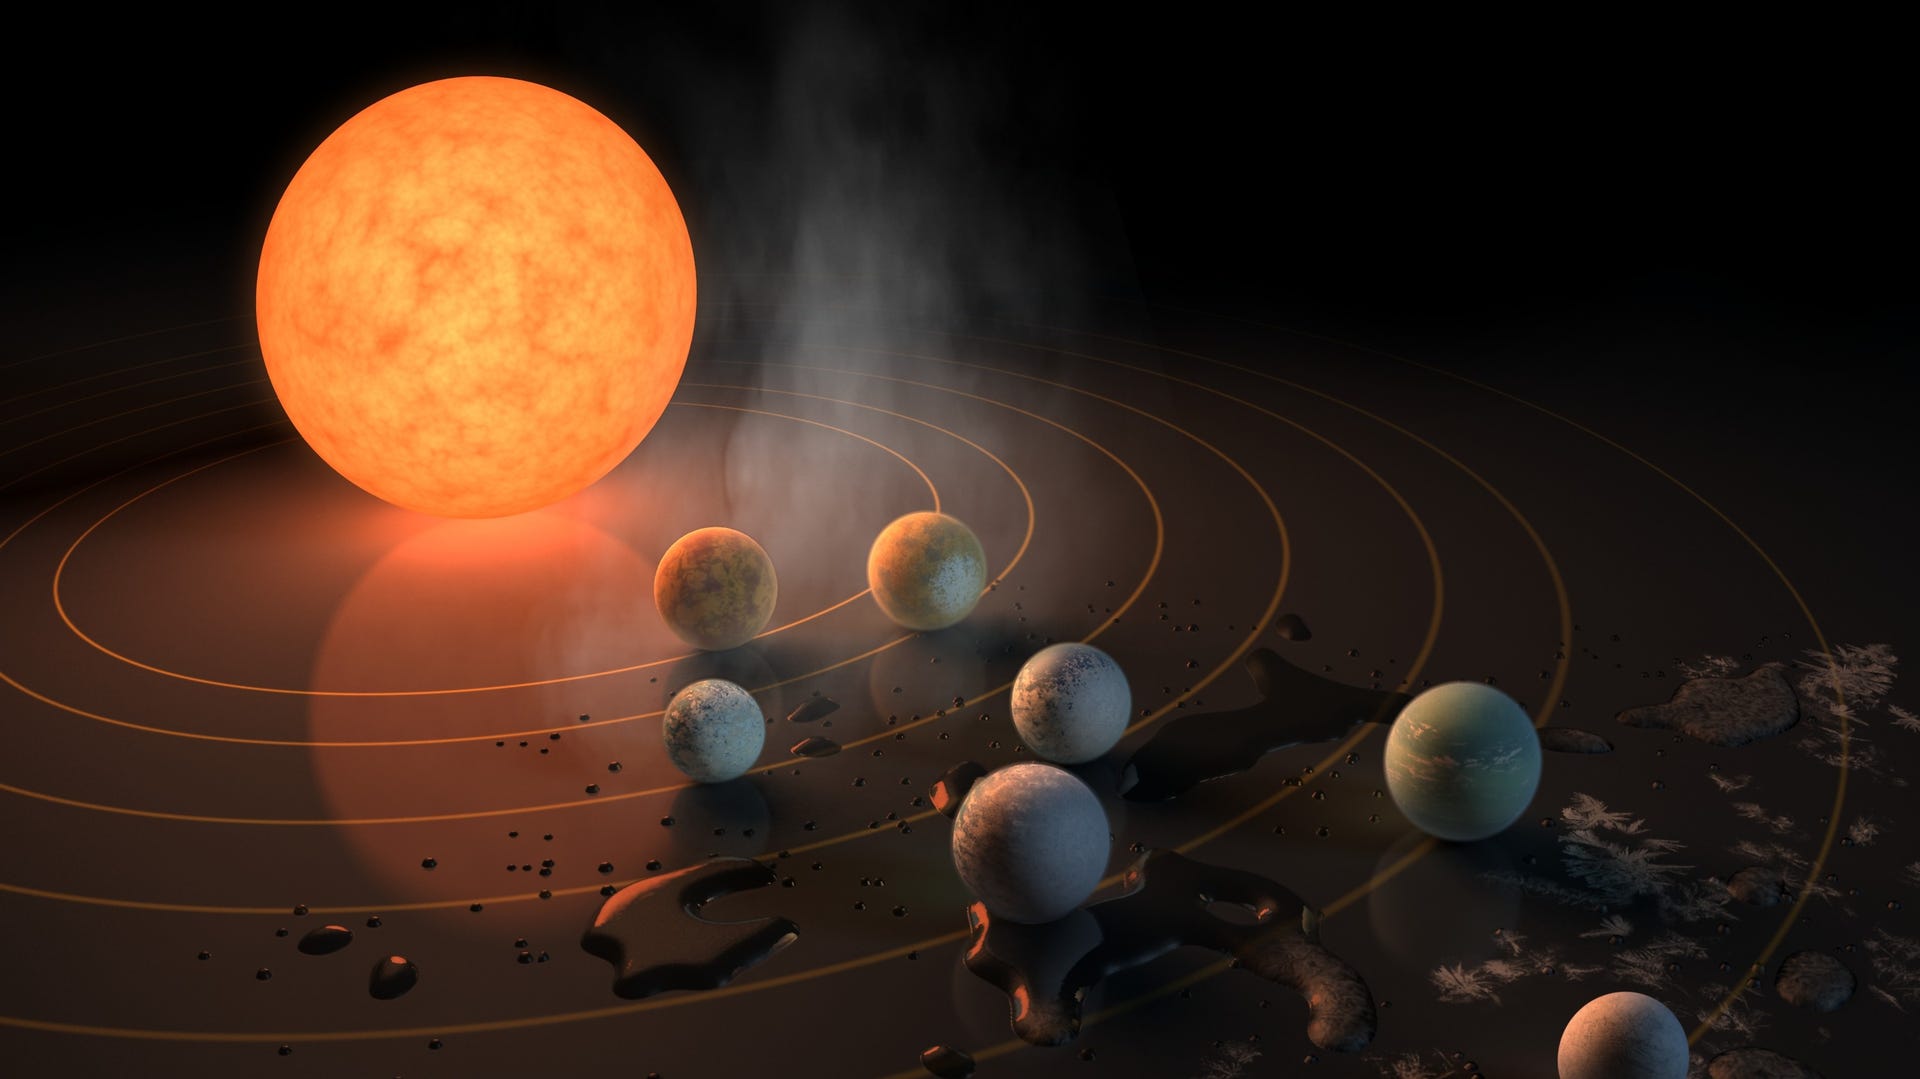 Stylized illustration shows an orange star with seven Earth-sized planets around it in orbit.